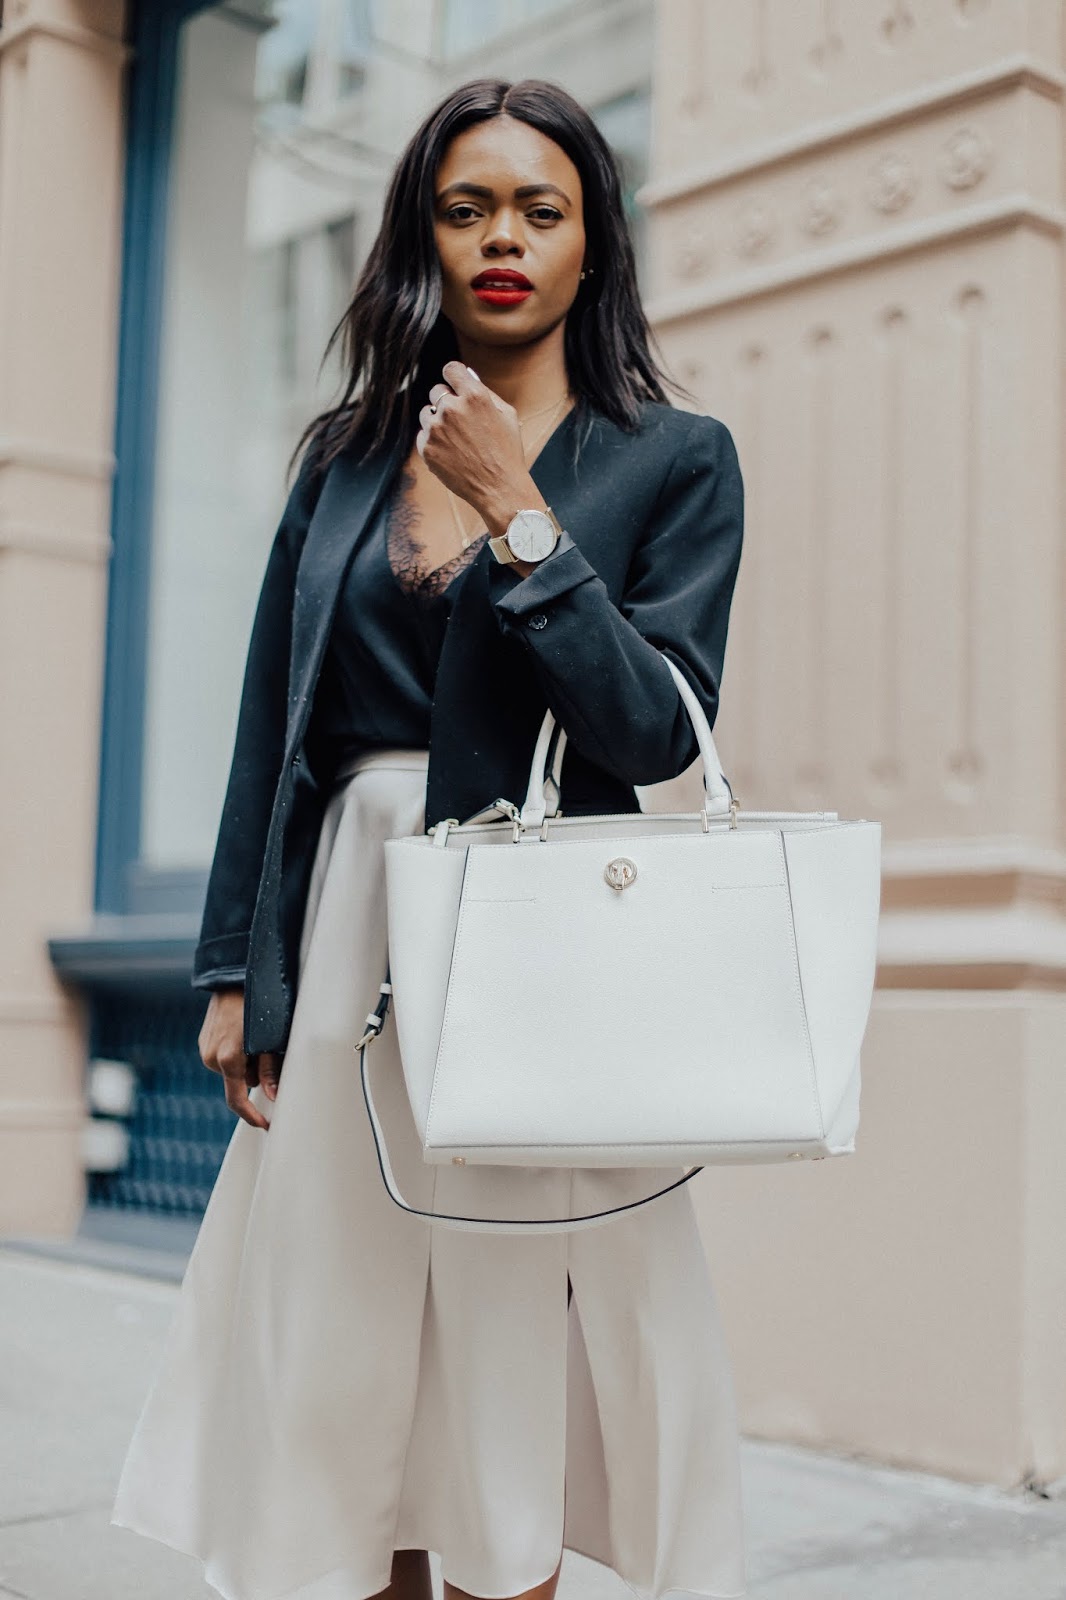 Dadou~Chic: Why You Need A White Work Bag